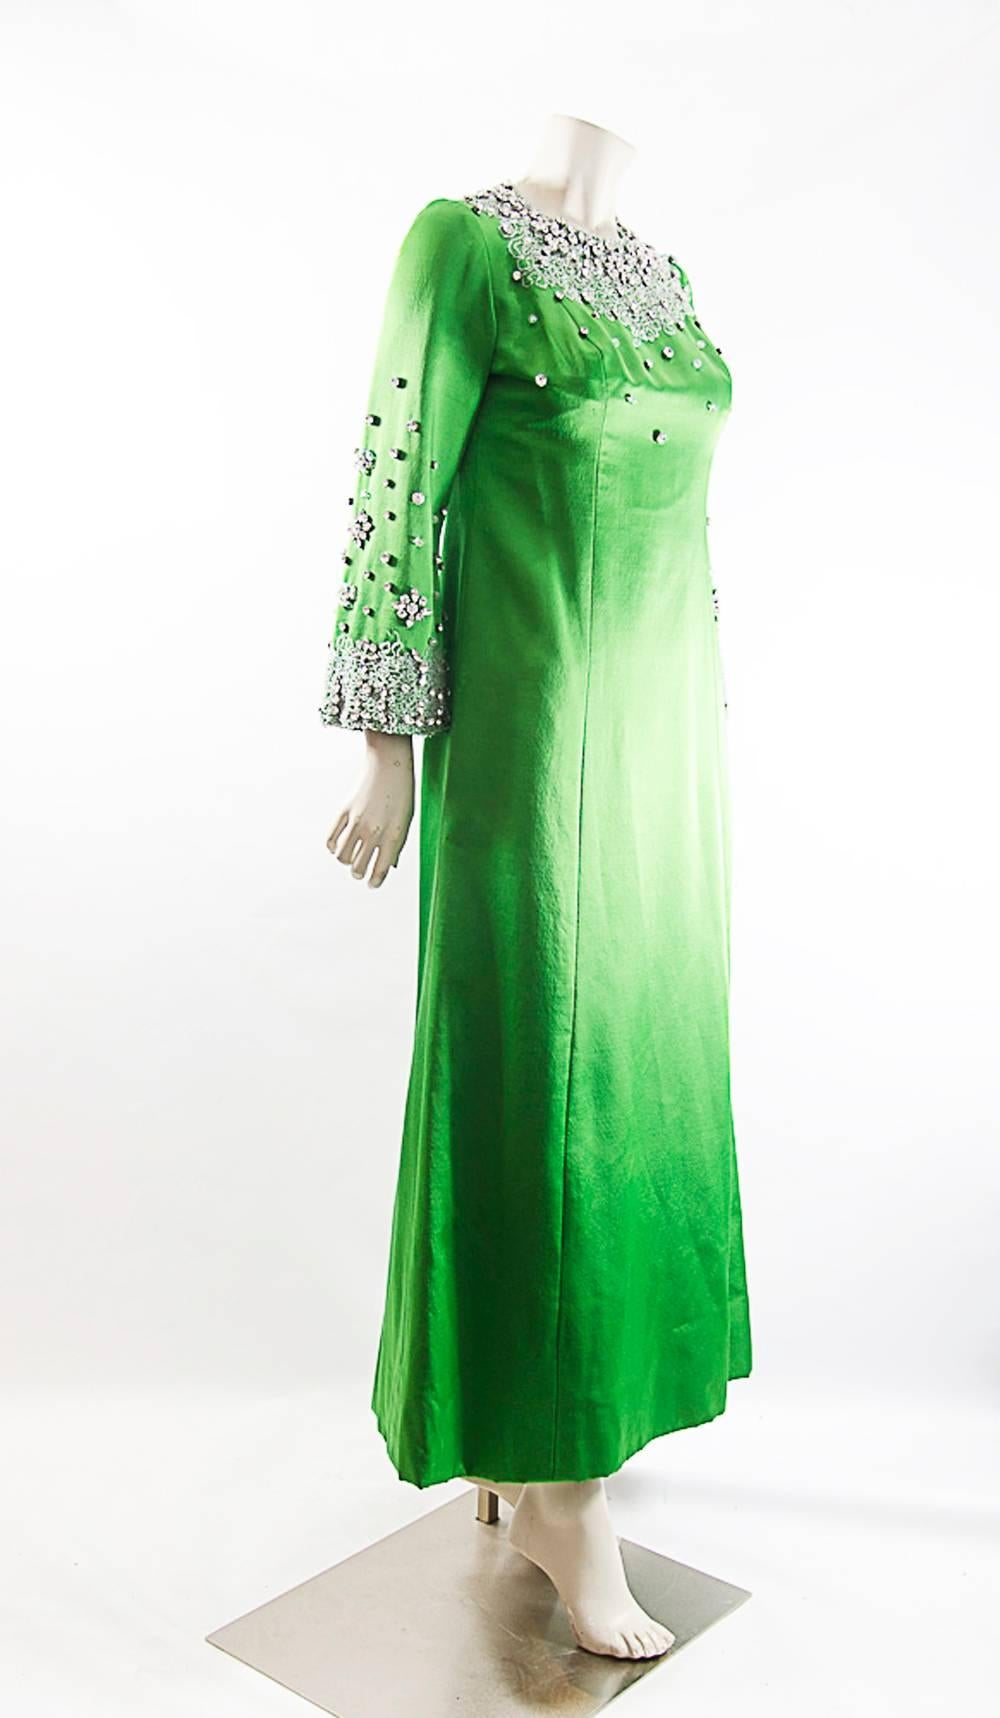 Stunning Noln Miller green  Gown . Pristine Condition. Apple green color frosted with hand sewn crystals and embelished with caviar beads. . Circa 1960.Pure masterpiece. Size 4 with bust 34